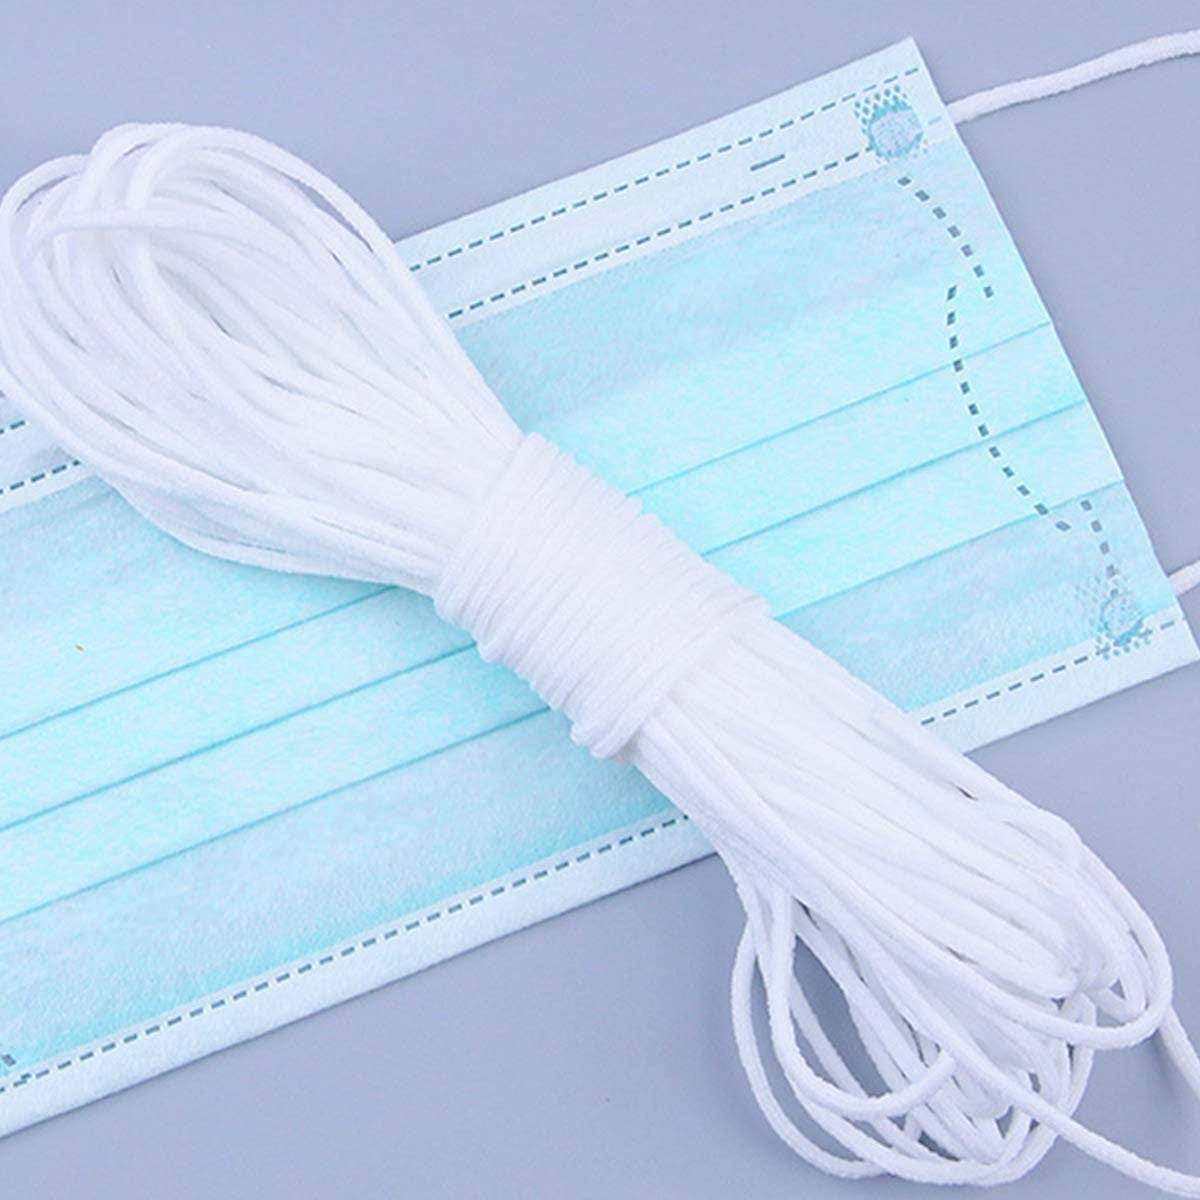 Cord Securing Holder Earloop Band DIY Craft Soft Ear Tie Rope How to Make Sewing Trim 1/4 Inch 10 Yards Elastic Mask Strap String and 10 Pcs Mask Fabric Cloth 